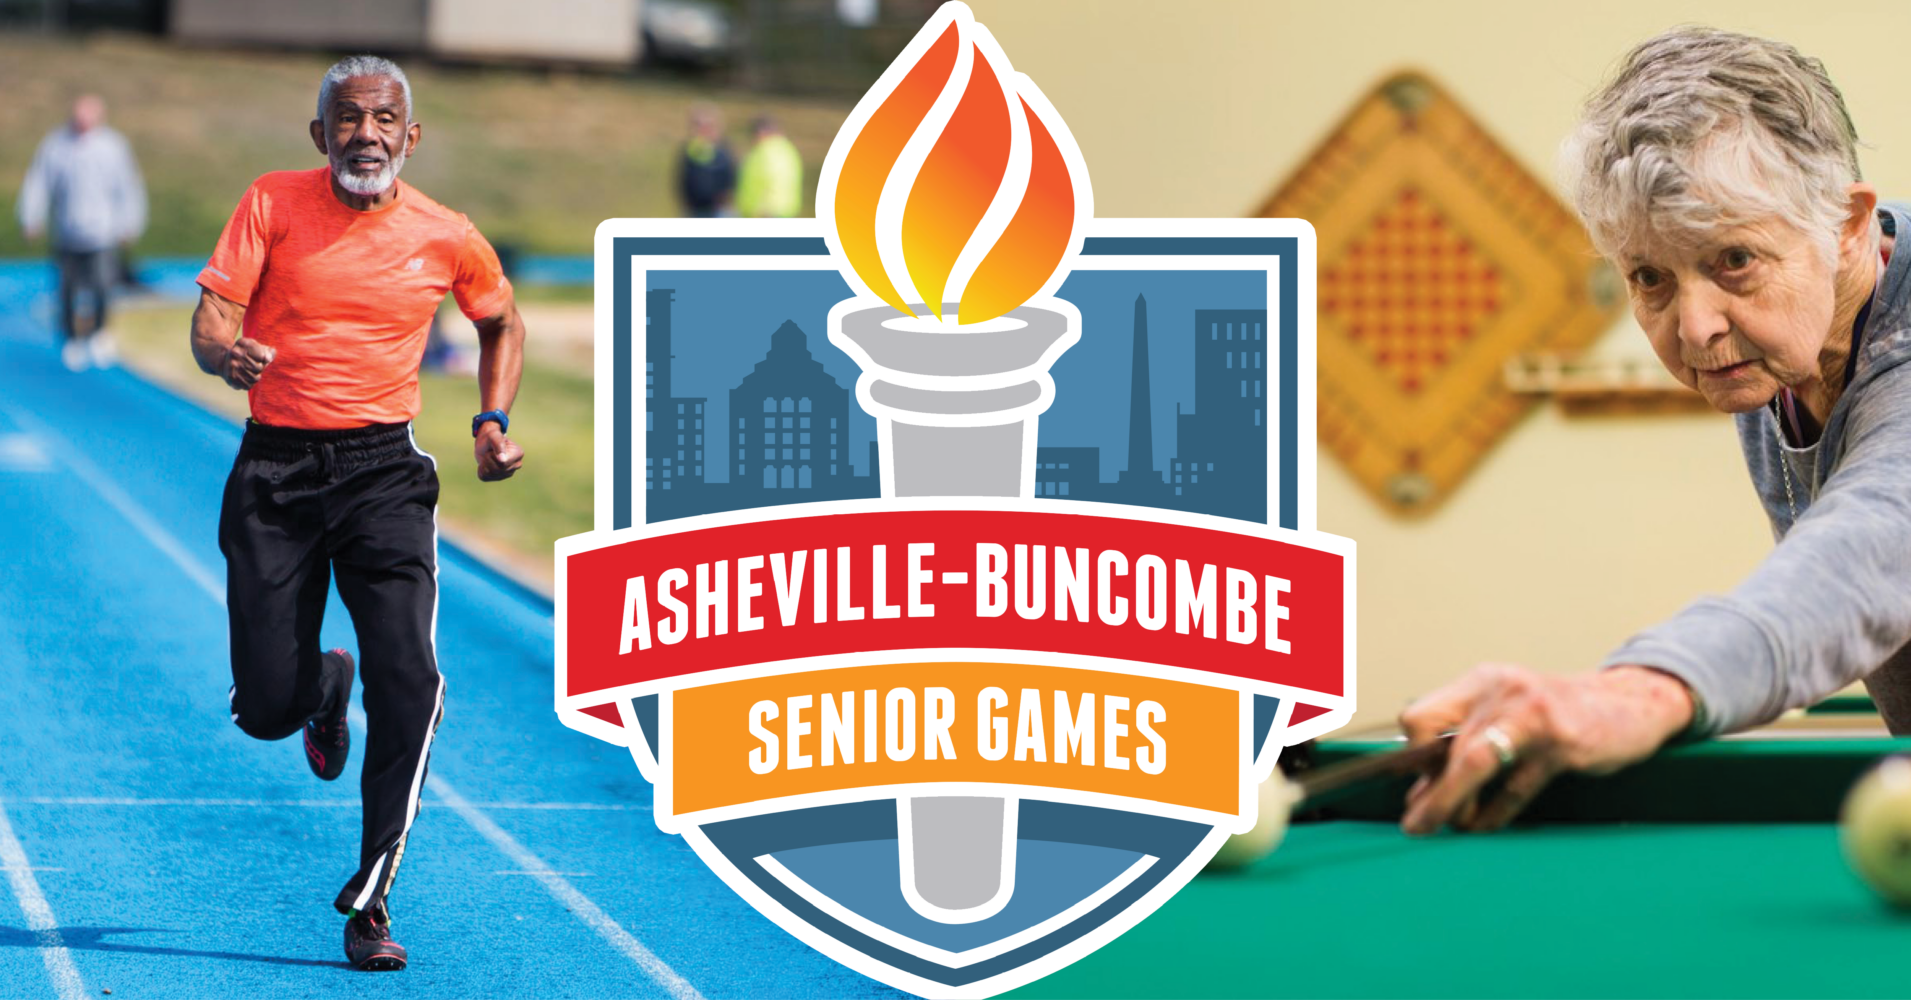 Asheville-Buncombe Senior Games and SilverArts promote health, wellness and creativity – The City of Asheville